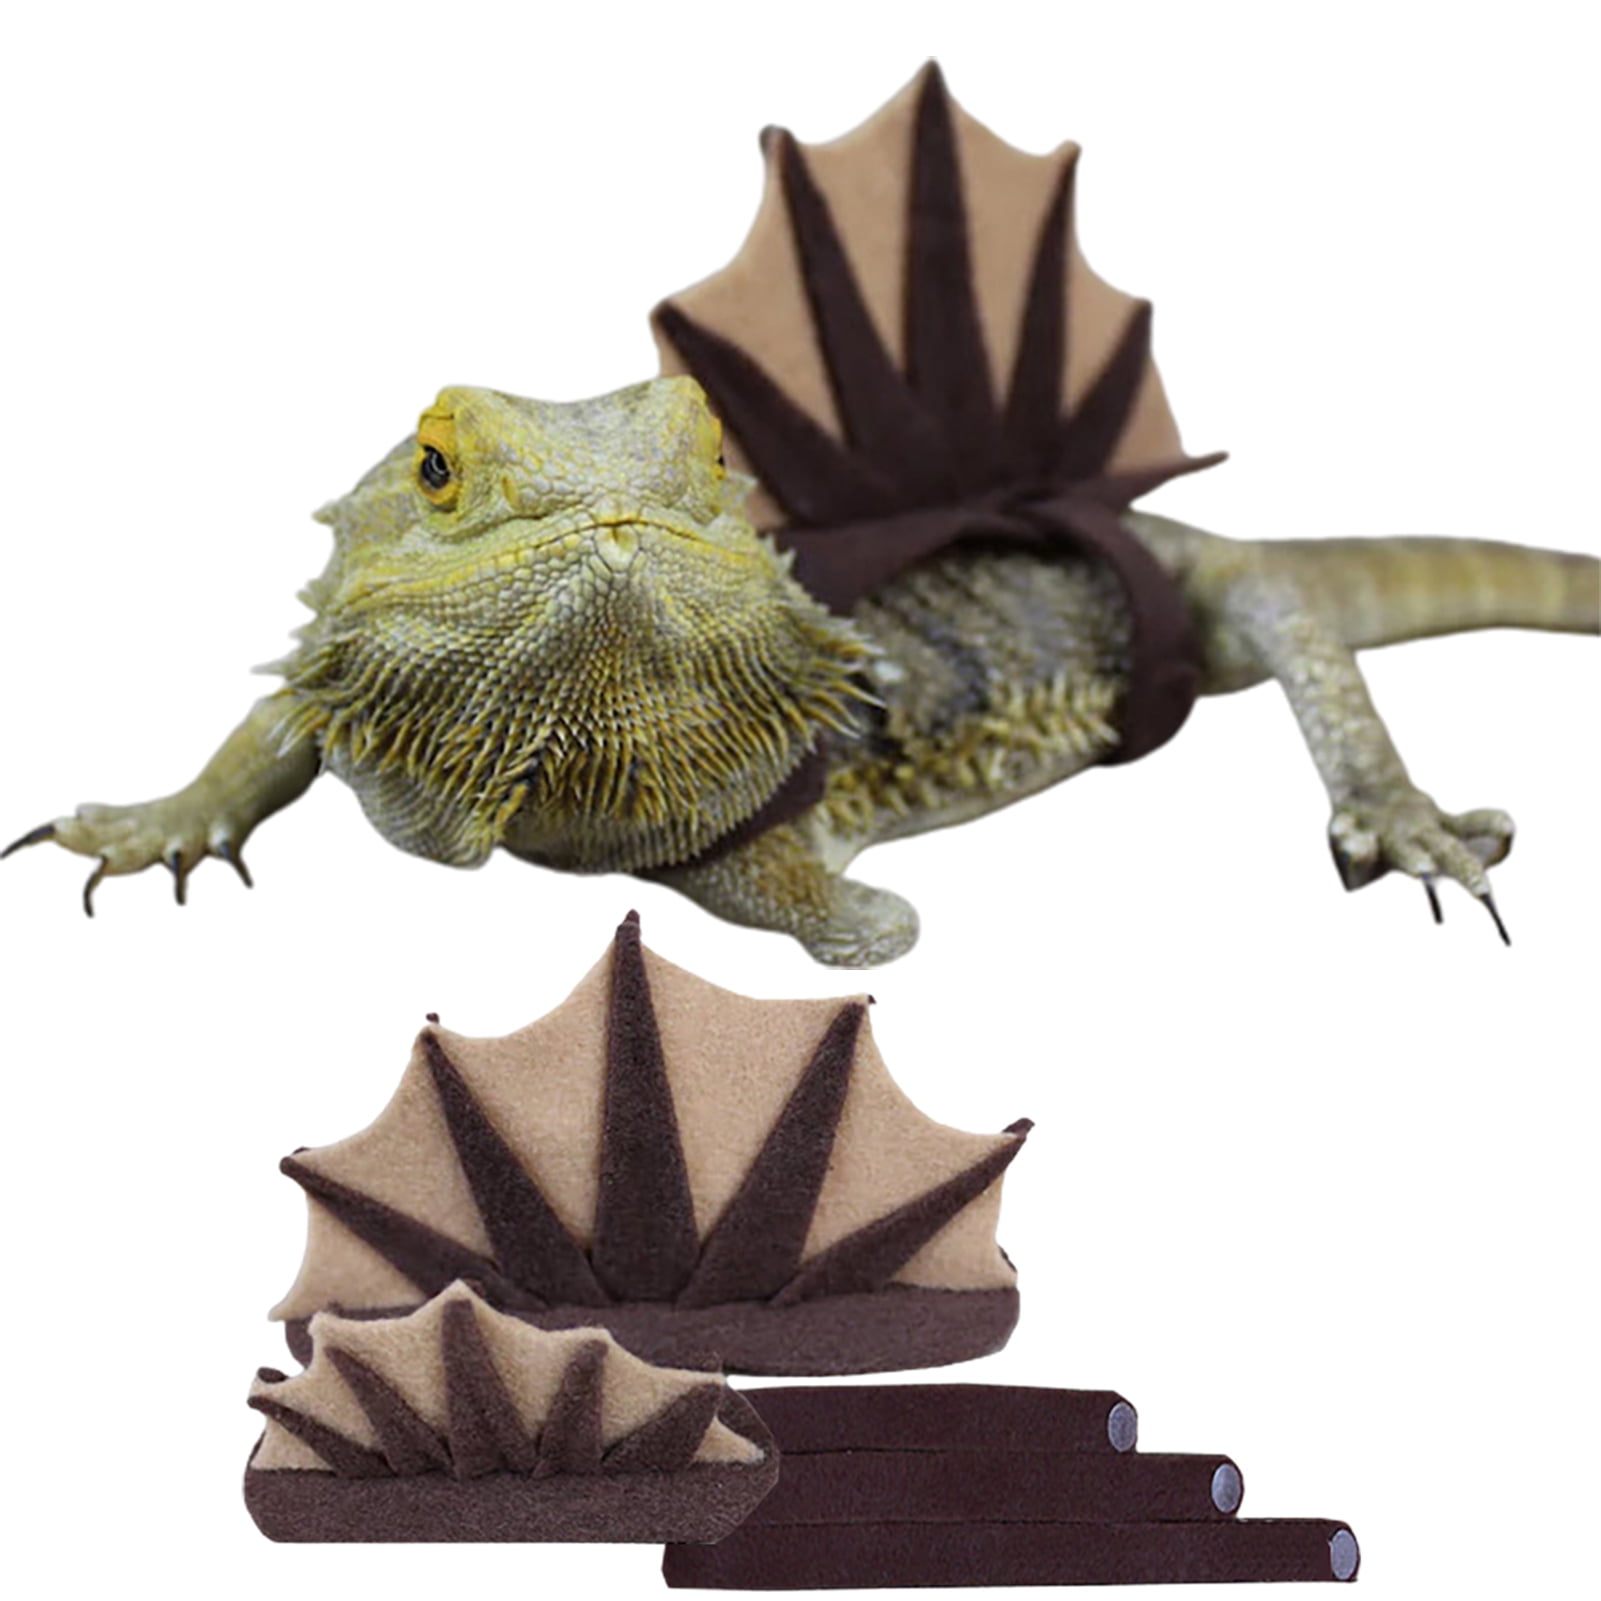 Shenmeida Lizard Costume Realistic Comfortable Touch Night Reptile Bearded Dragon Lizard Apparel Clothes Outfits for Fun - Walmart.com